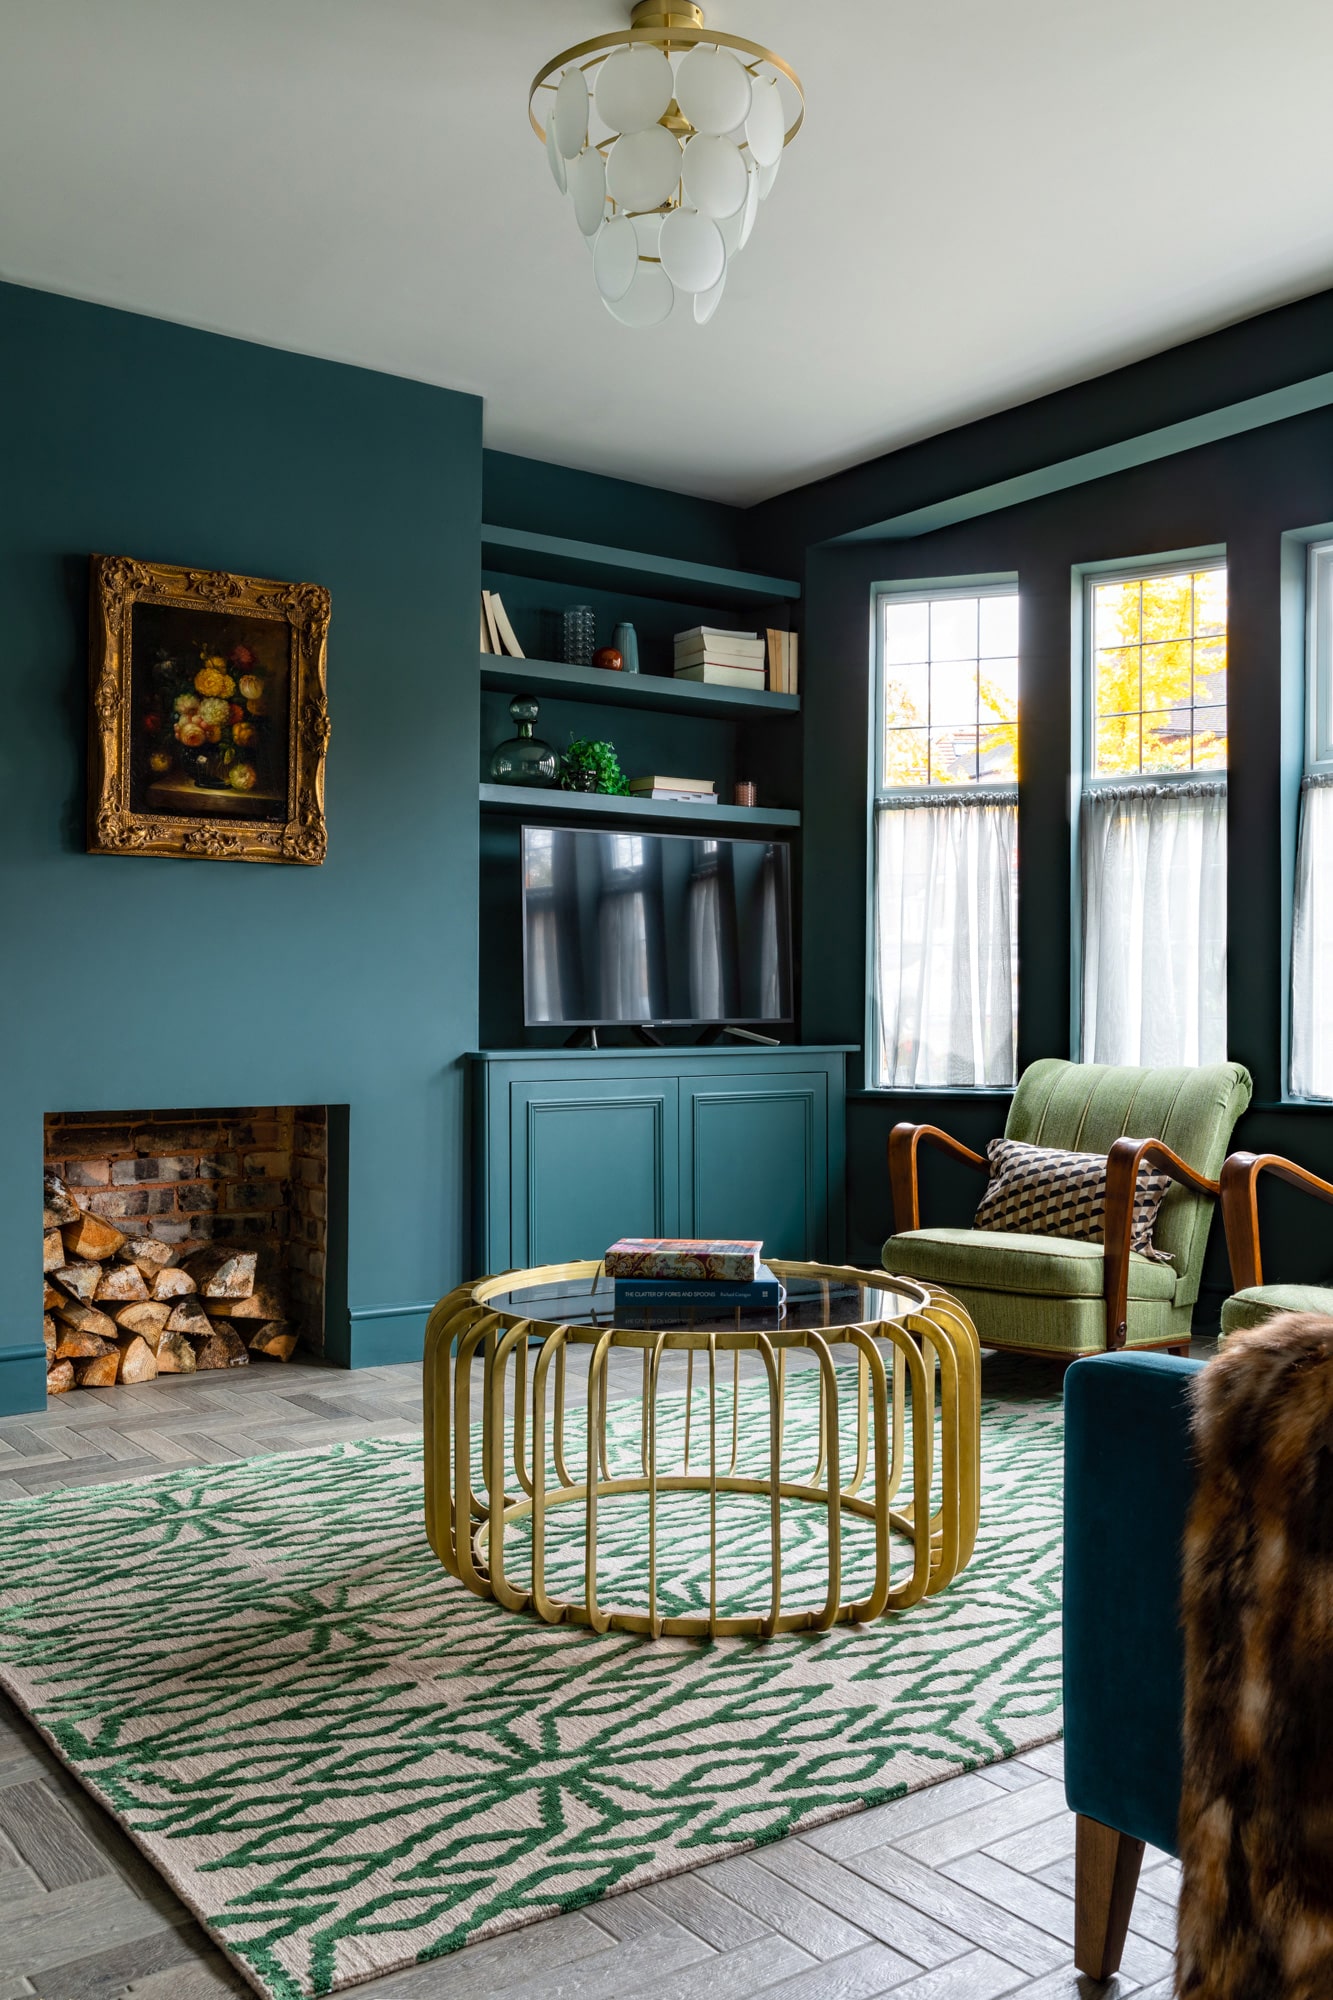  interior design photography: a sitting room with dark blue walls, a fireplace with wood logs, built in shelves and cardboard with a tv and books. There 2 green armchairs next to the window and a gold metal coffee table with a glass top in the middle of the room.